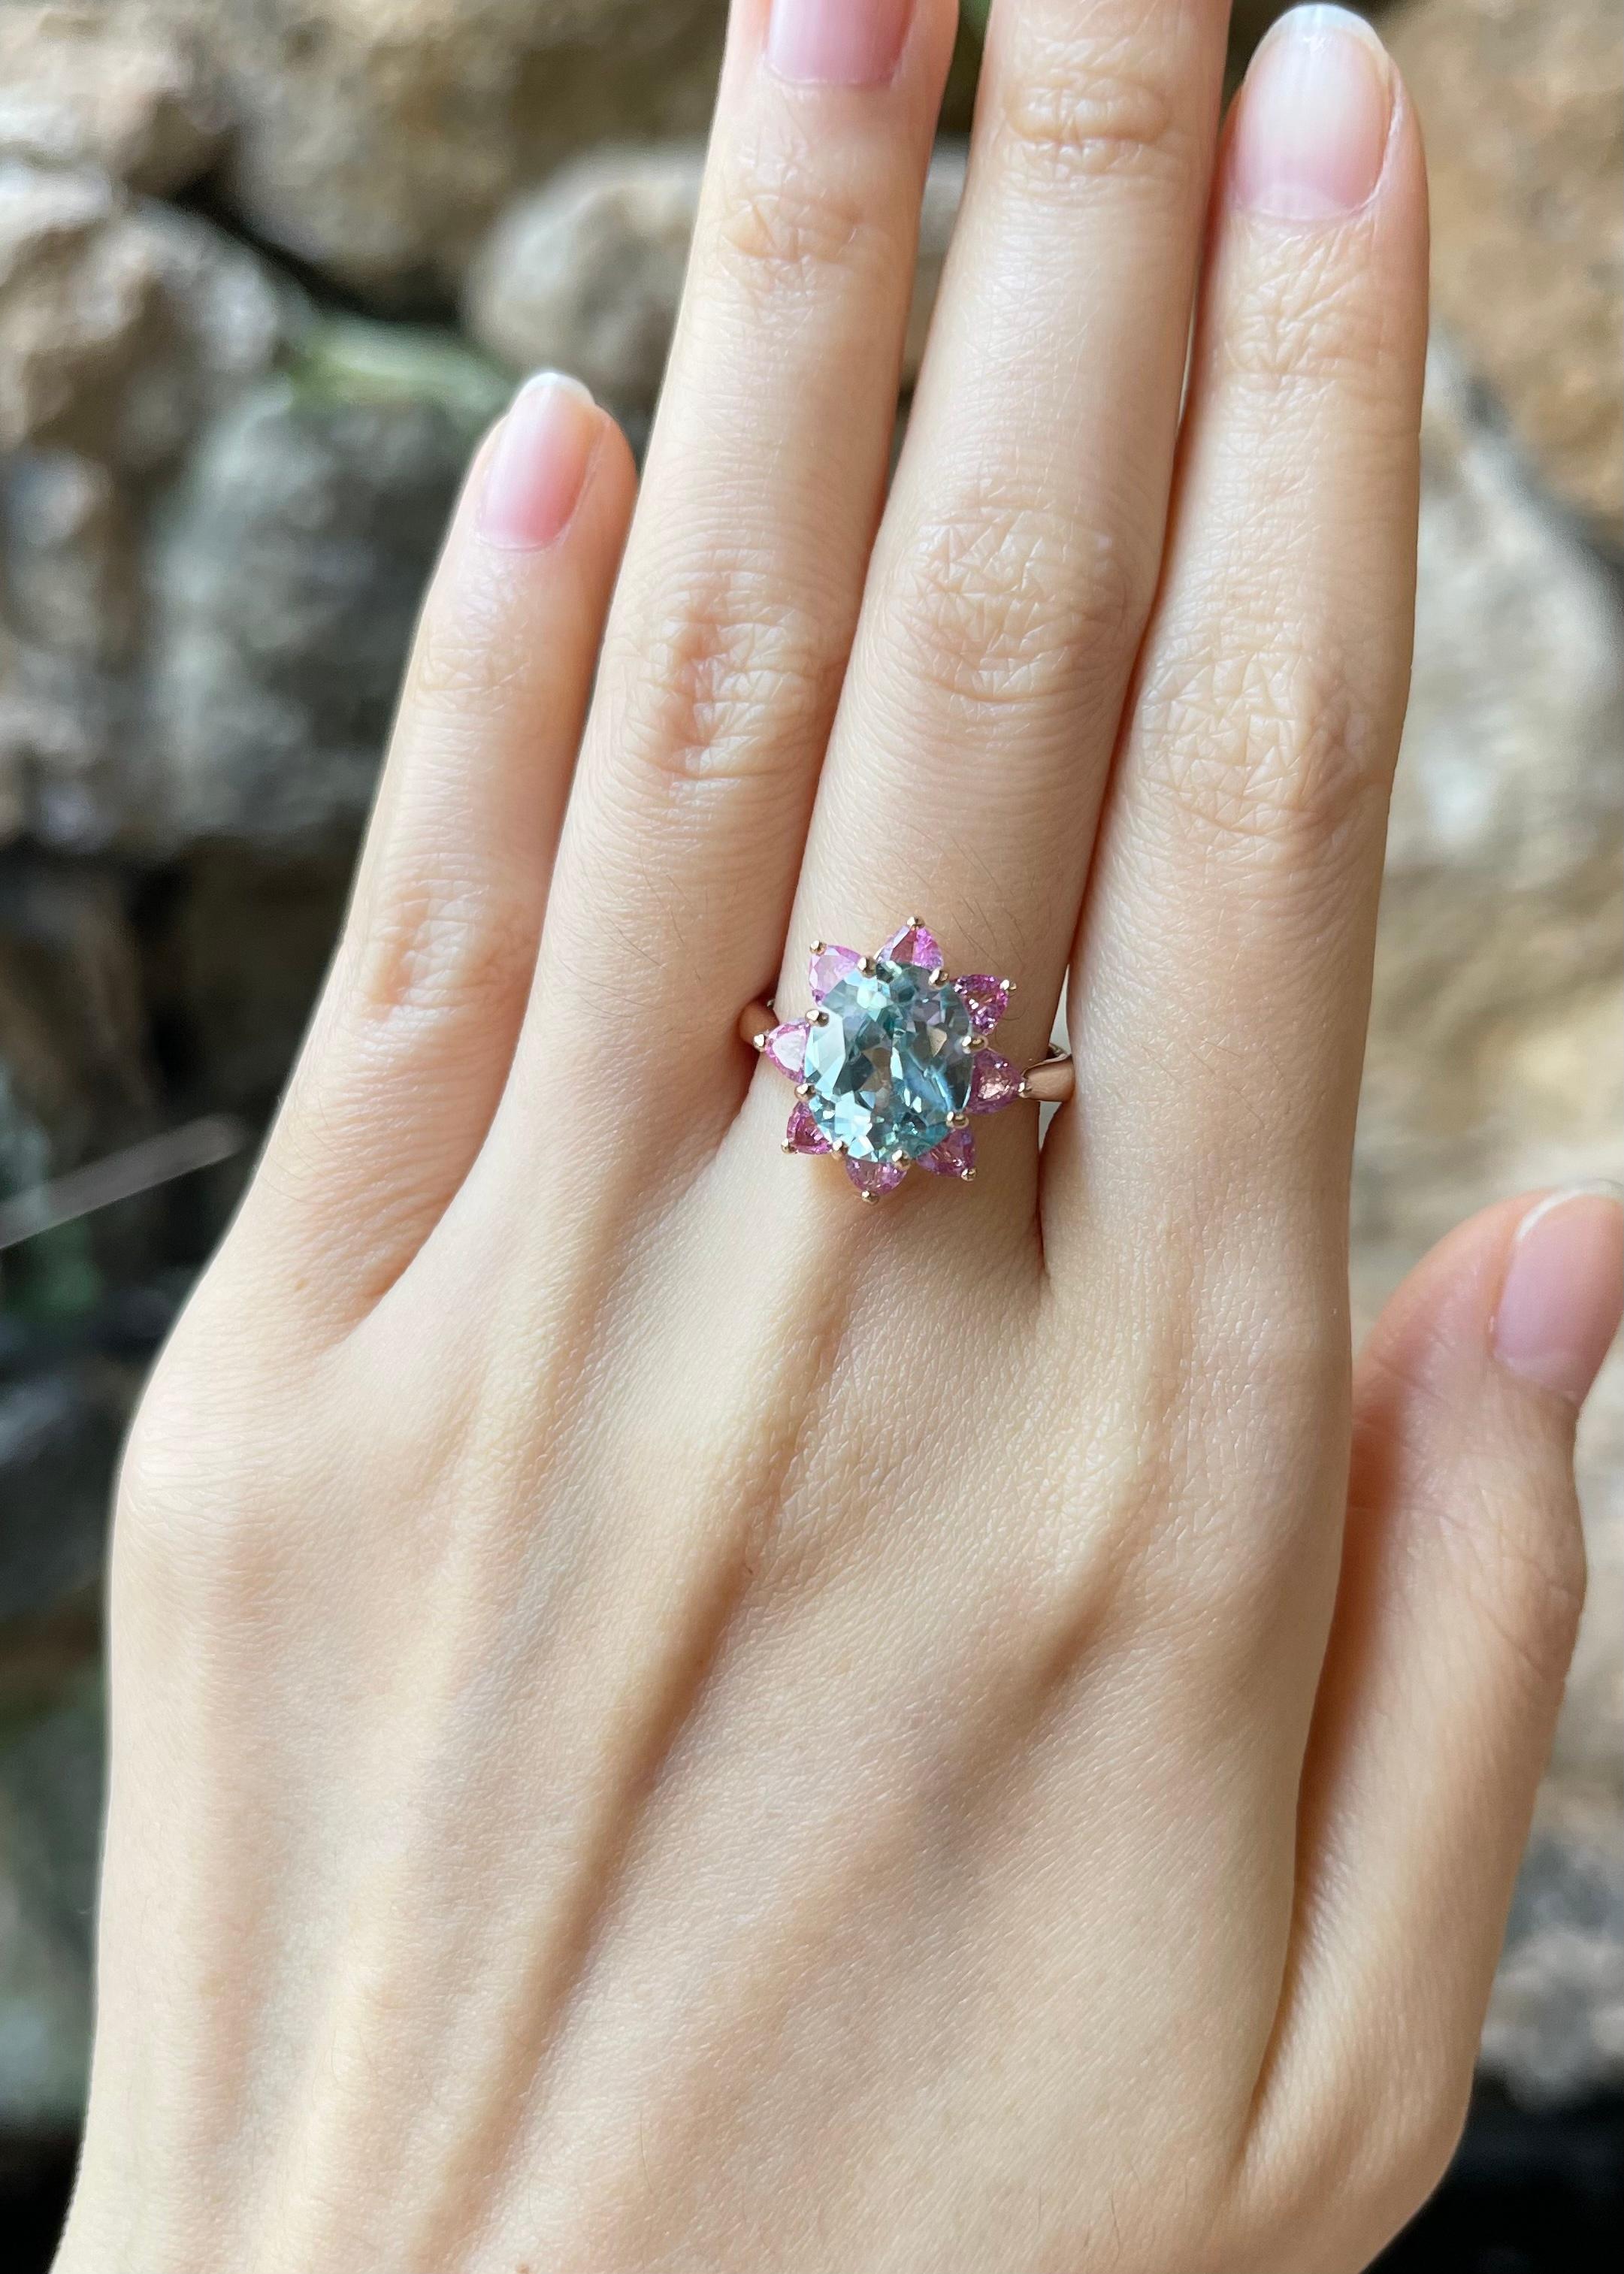 Blue Zircon 4.80 carats with Pink Sapphire 1.54 carats Ring set in 18K Rose Gold Settings

Width:  1.5 cm 
Length: 1.6 cm
Ring Size: 54
Total Weight: 6.46 grams

